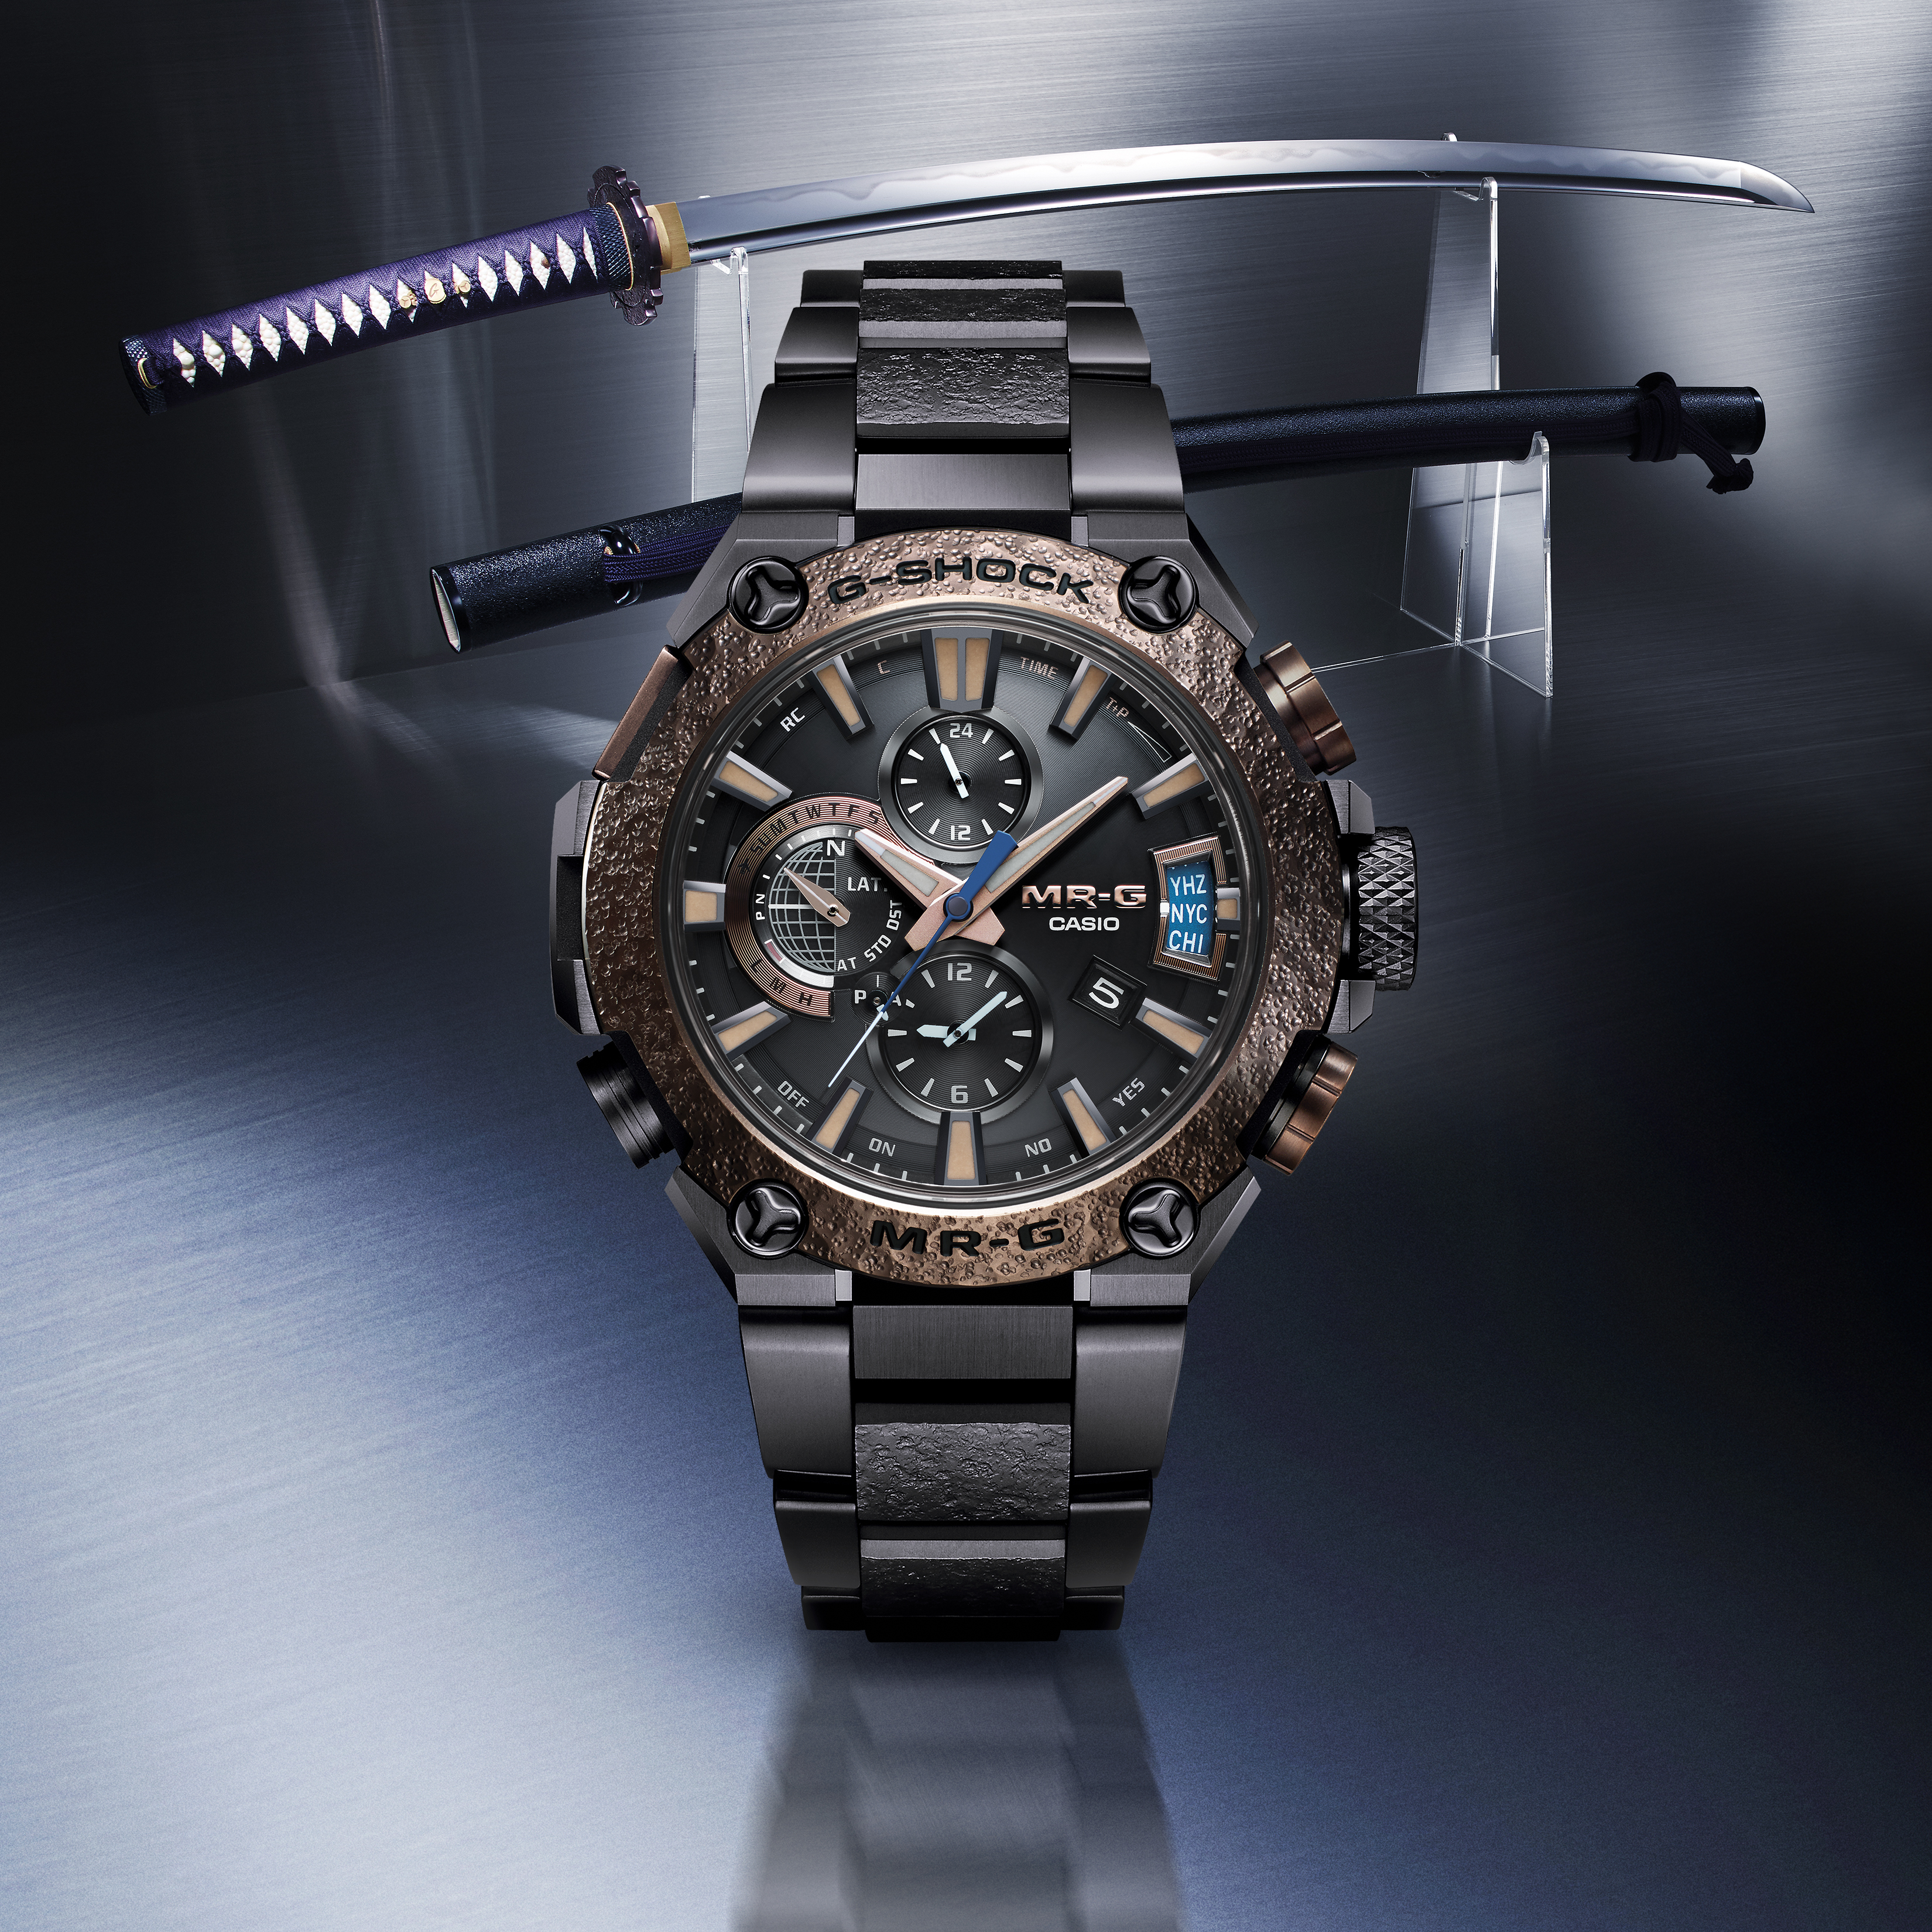 Casio G-SHOCK Continues To Innovate Premium MR-G Line With Special Edition Connected Timepiece